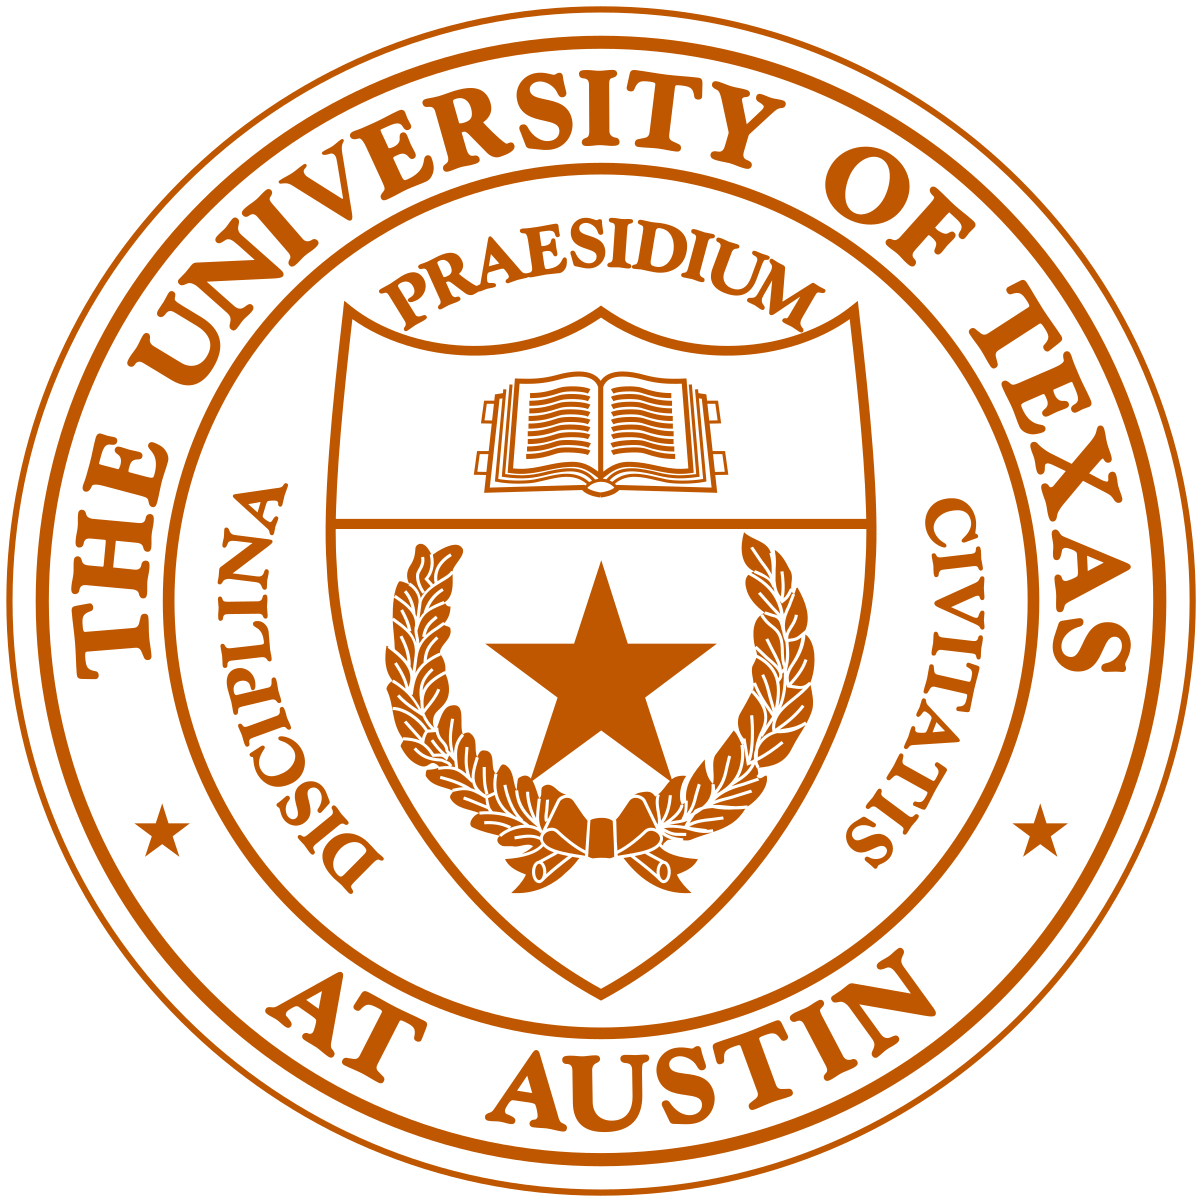 Old University of Tennessee Logo - University of Texas at Austin